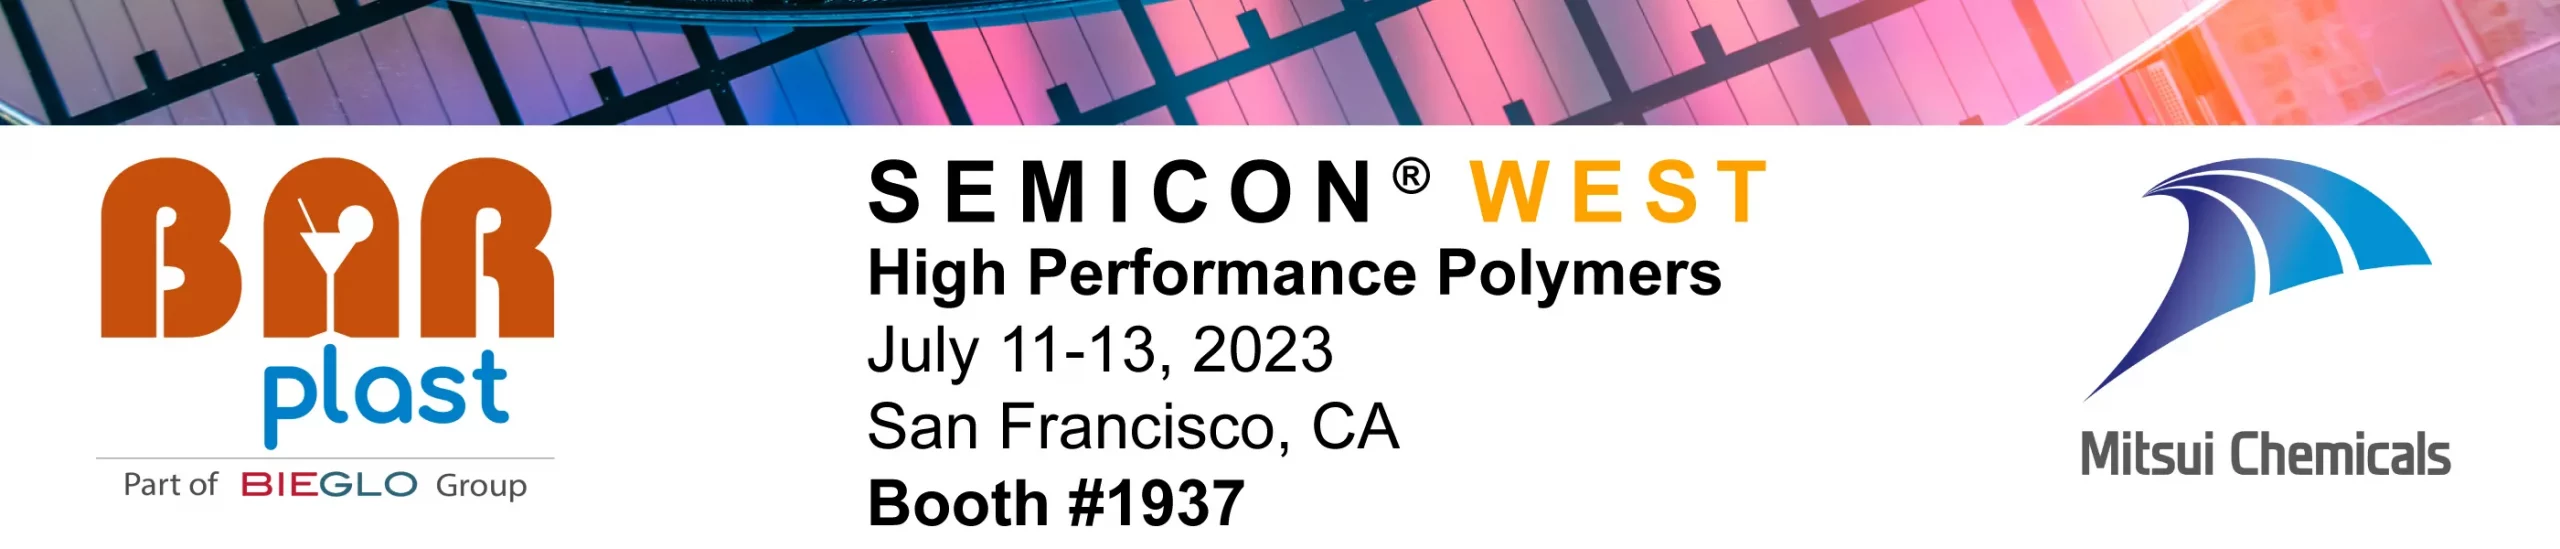 SEMICON WEST 2023 Landing page